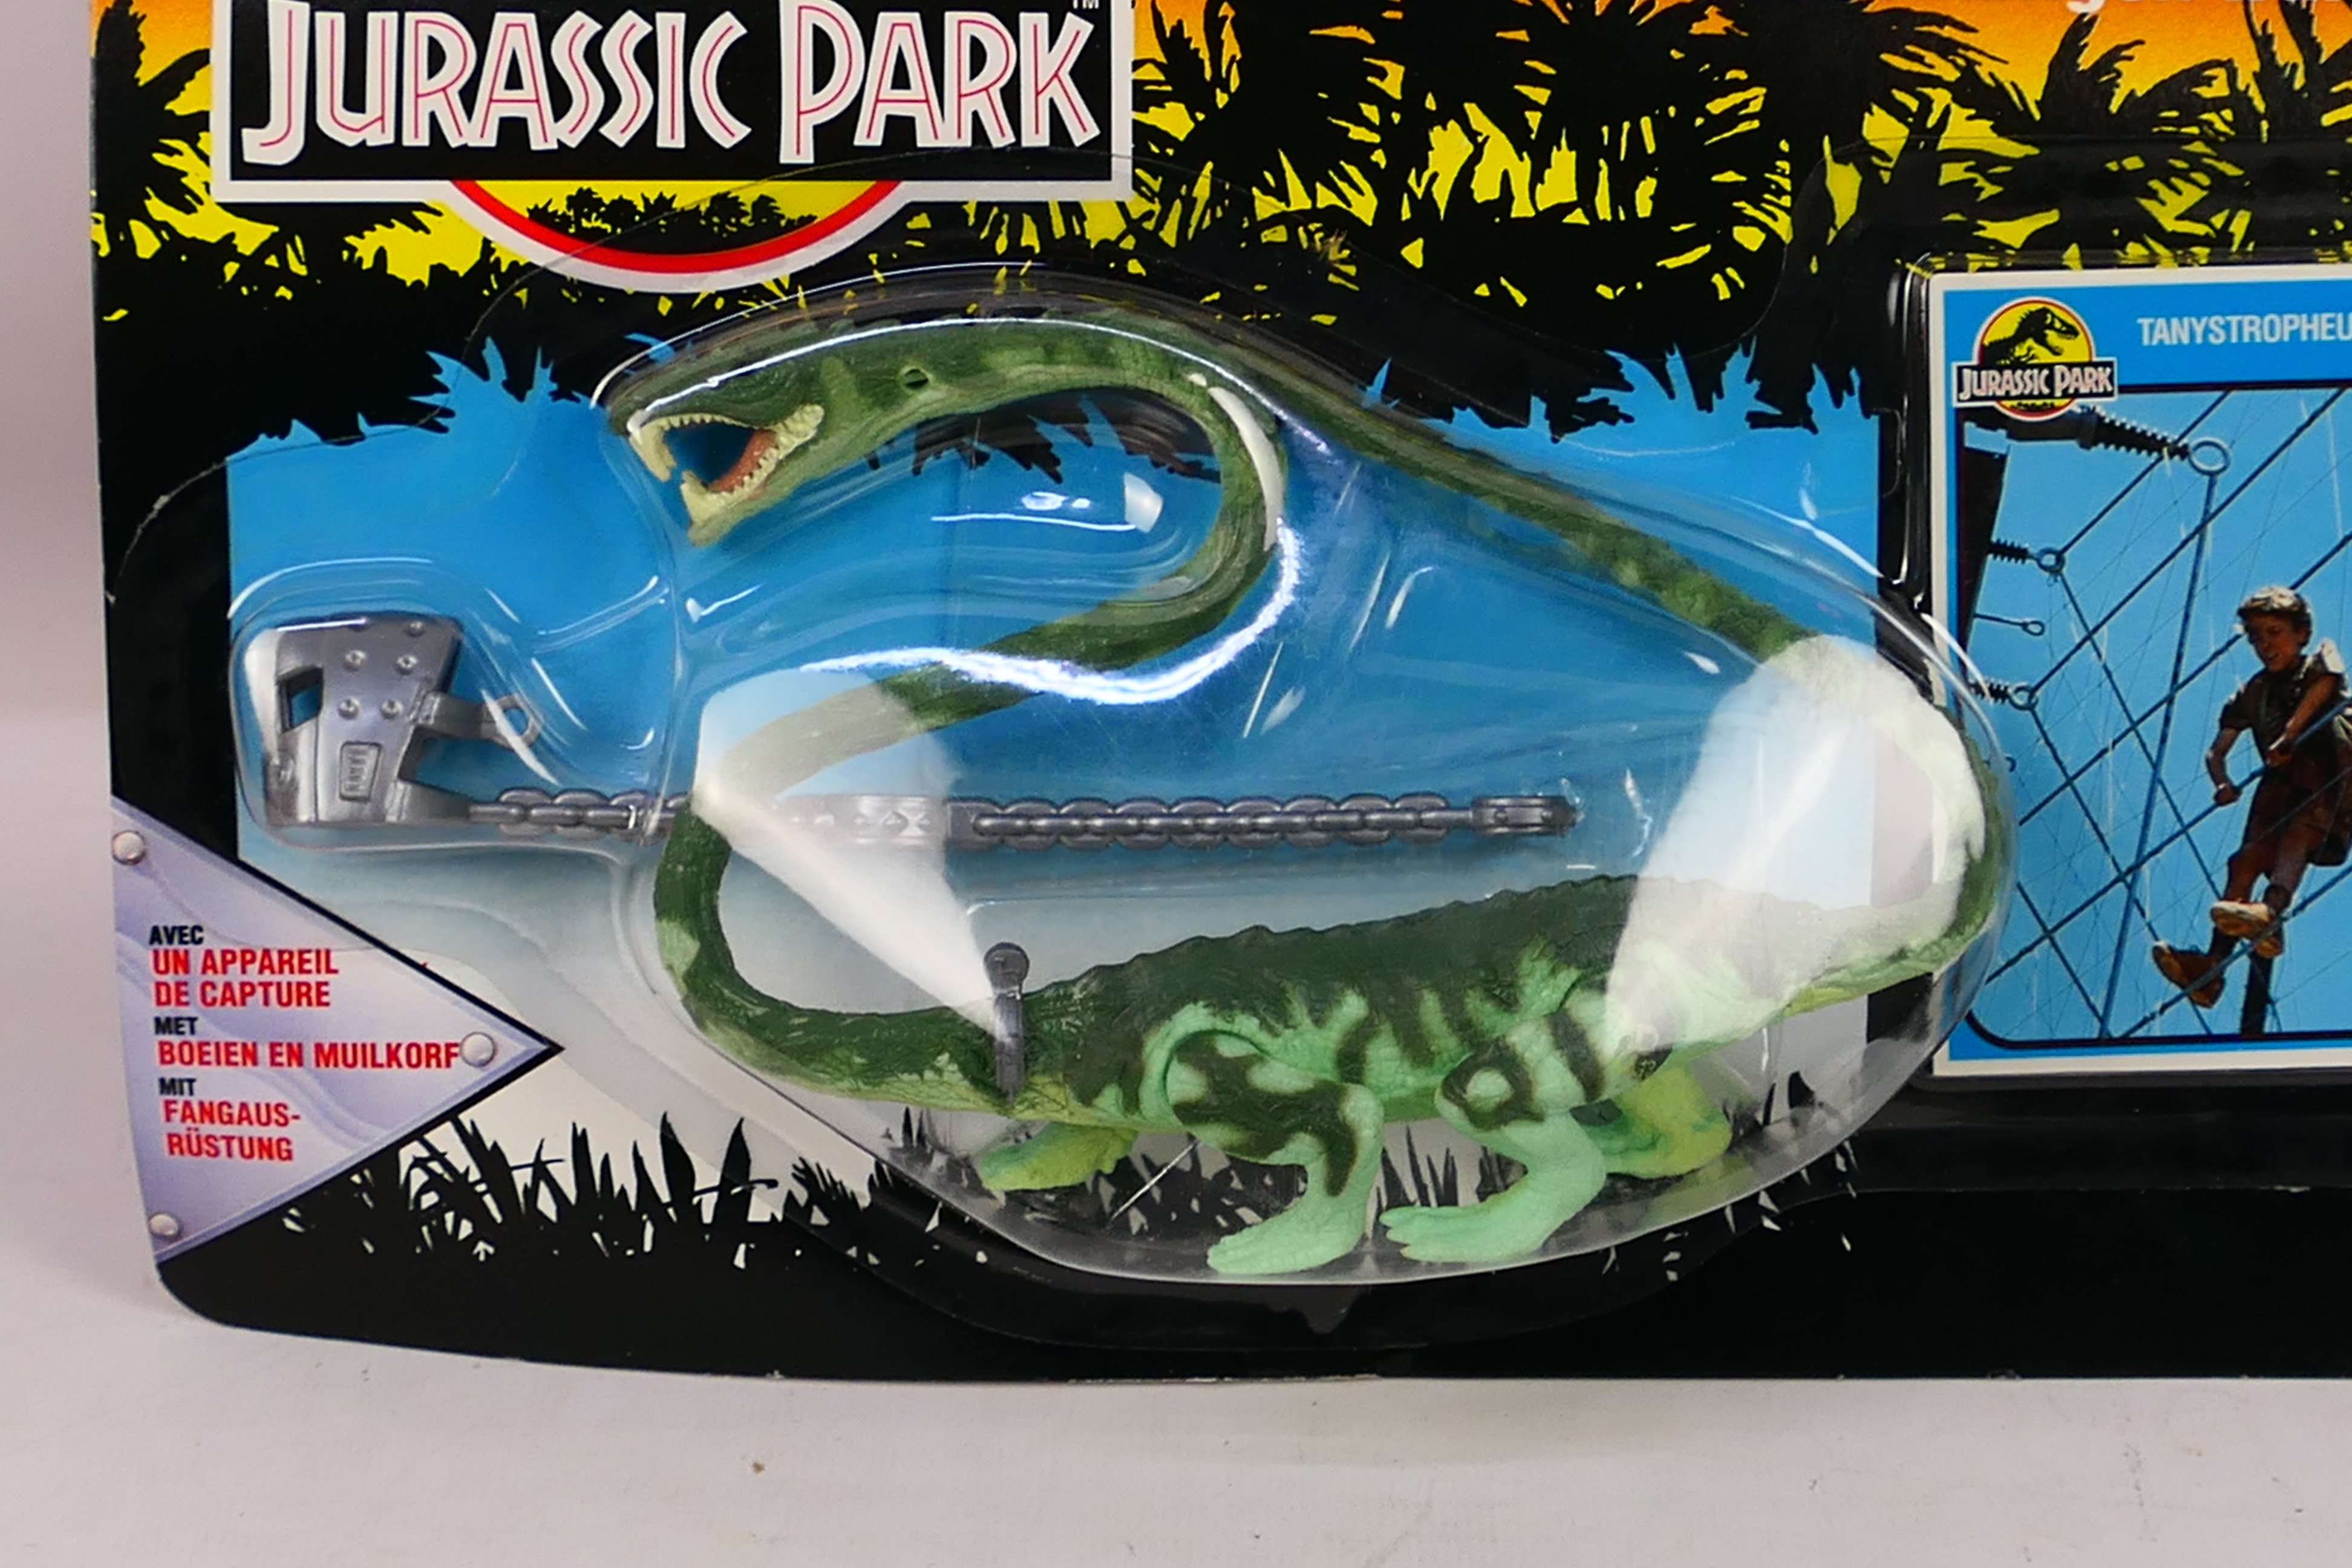 Kenner - Jurassic Park - A 1993 Blister packed figure of Tanytropheus from Jurassic Park. - Image 2 of 6